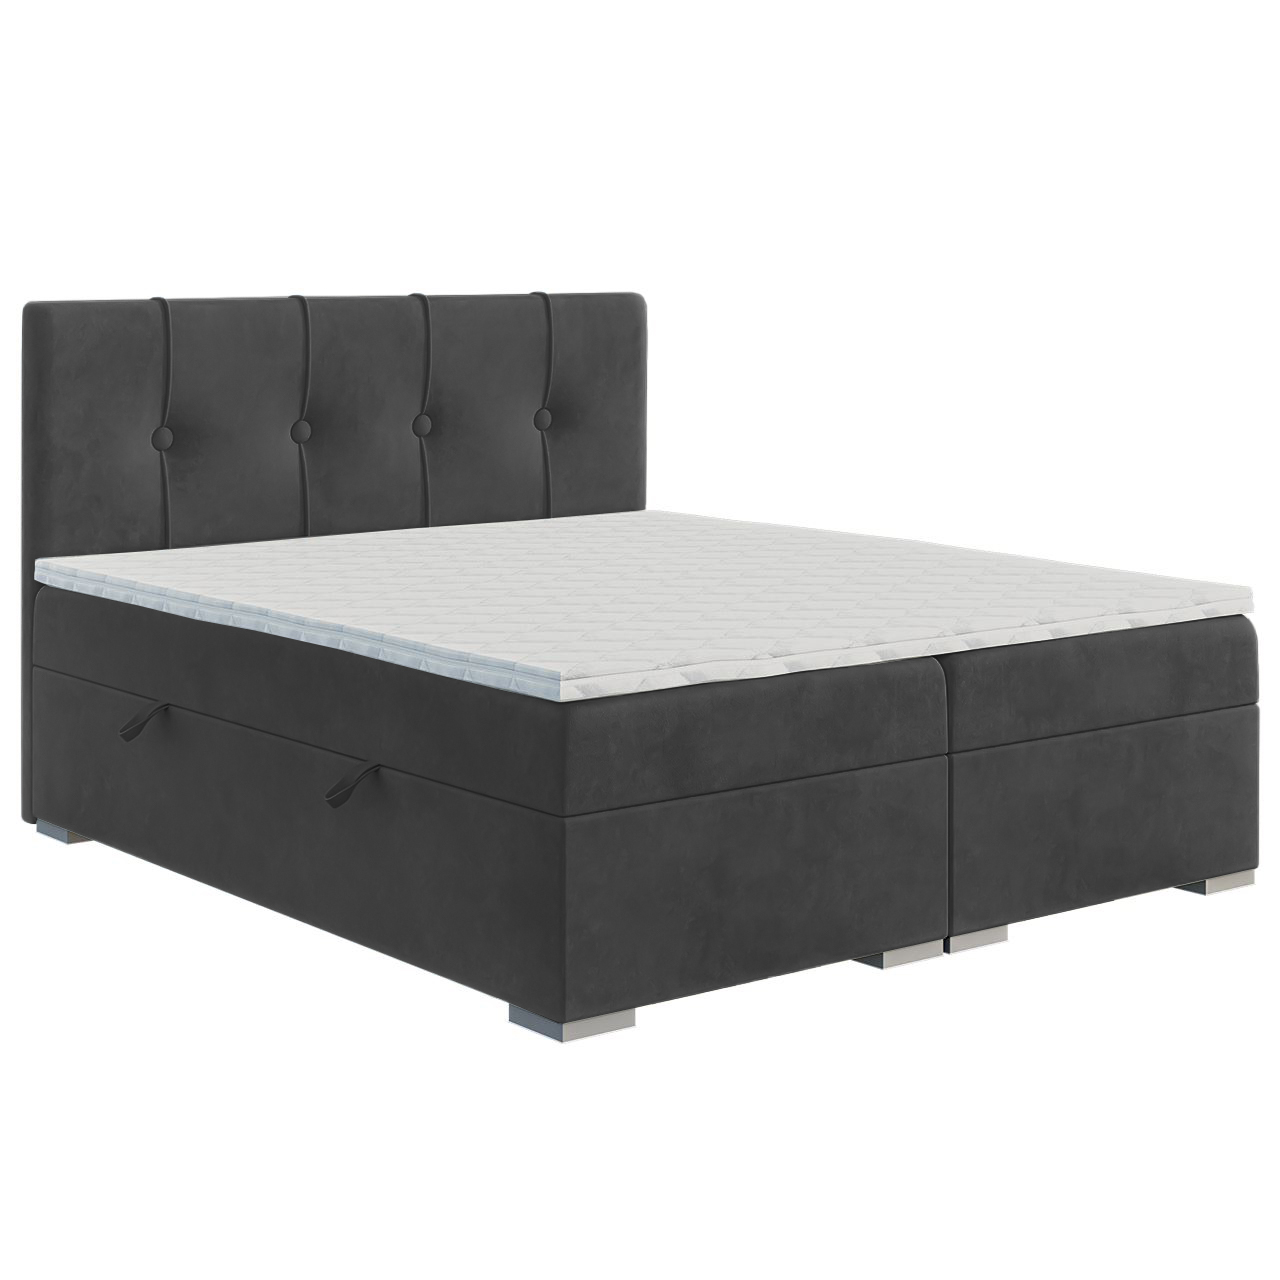 Upholstered bed RULEZ 160x200 riviera 97